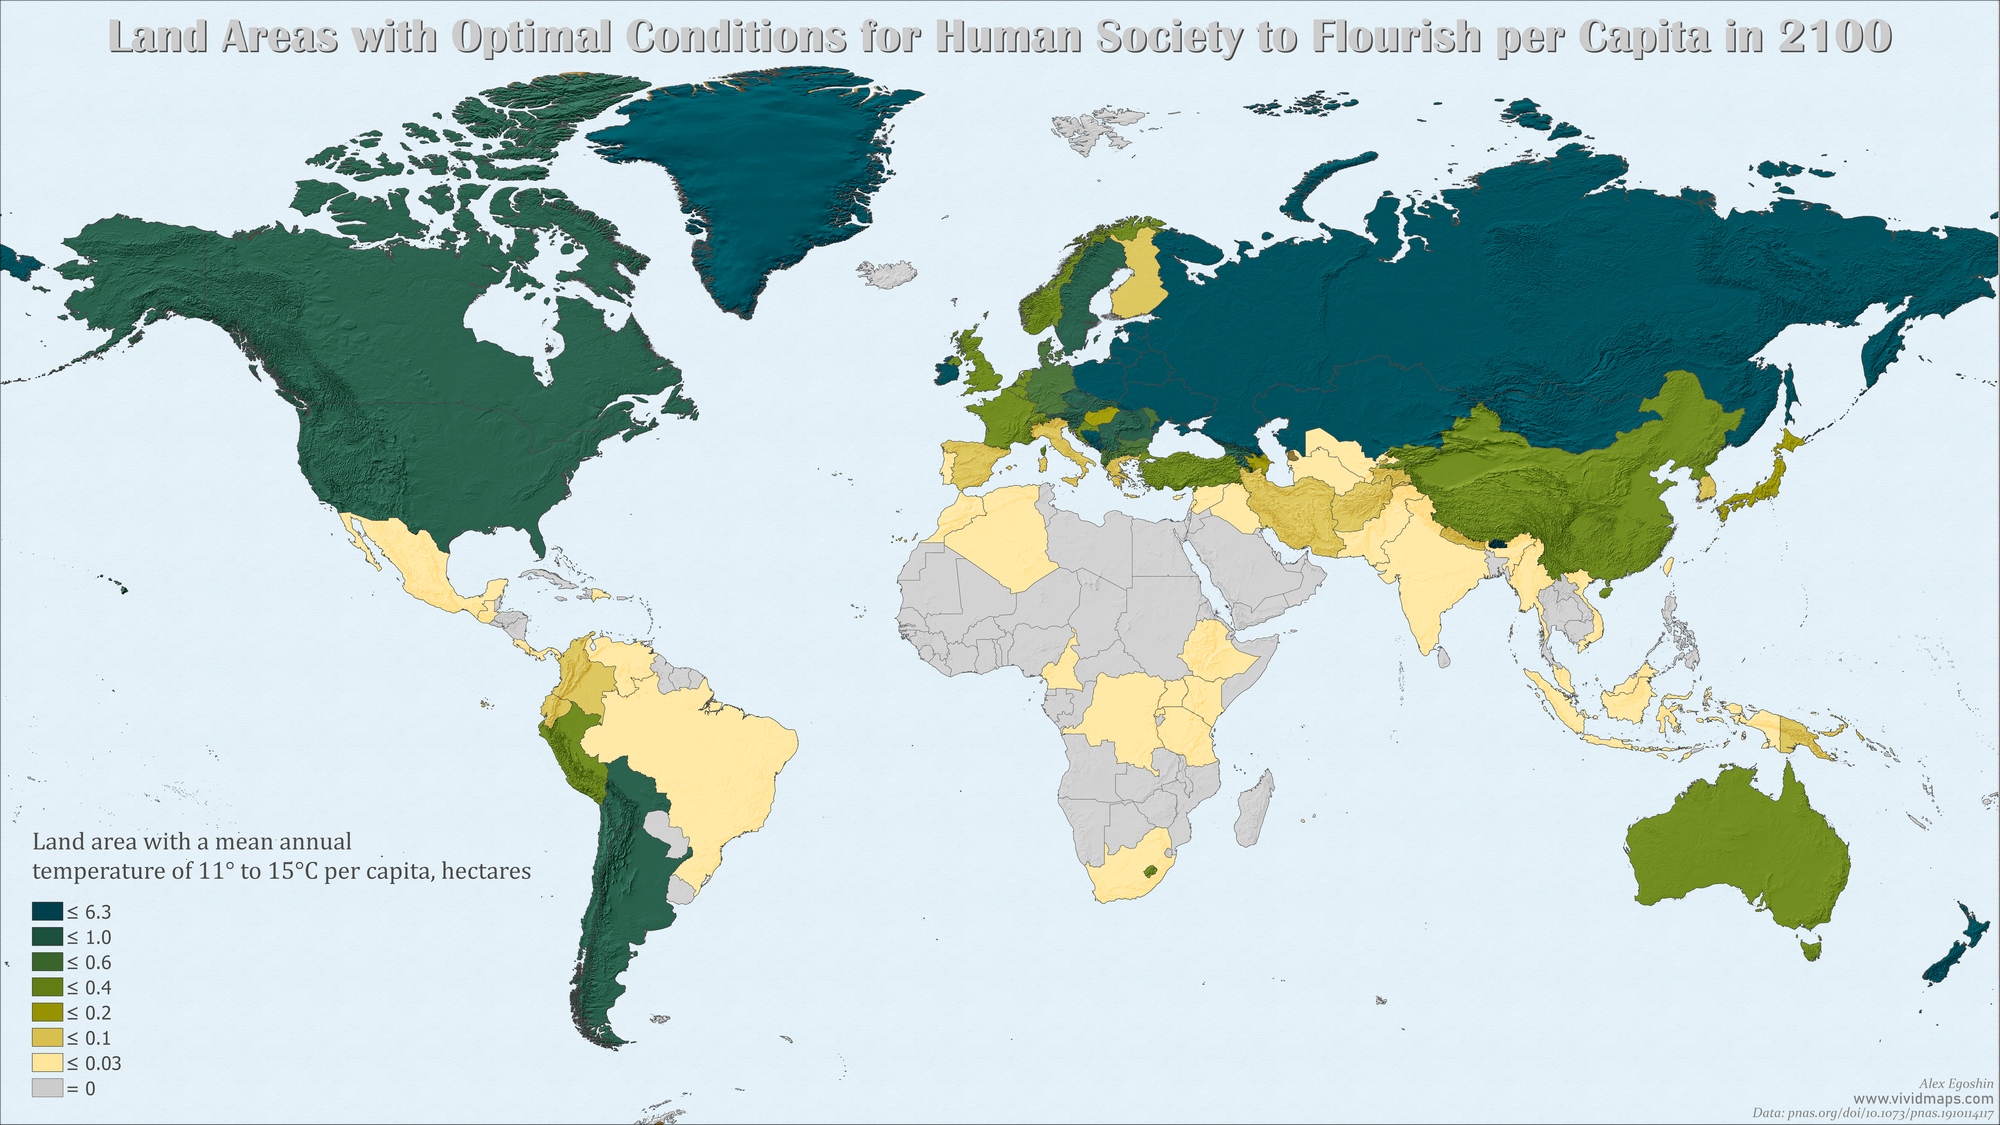 land area with optimal conditions for human society to flourish per capita